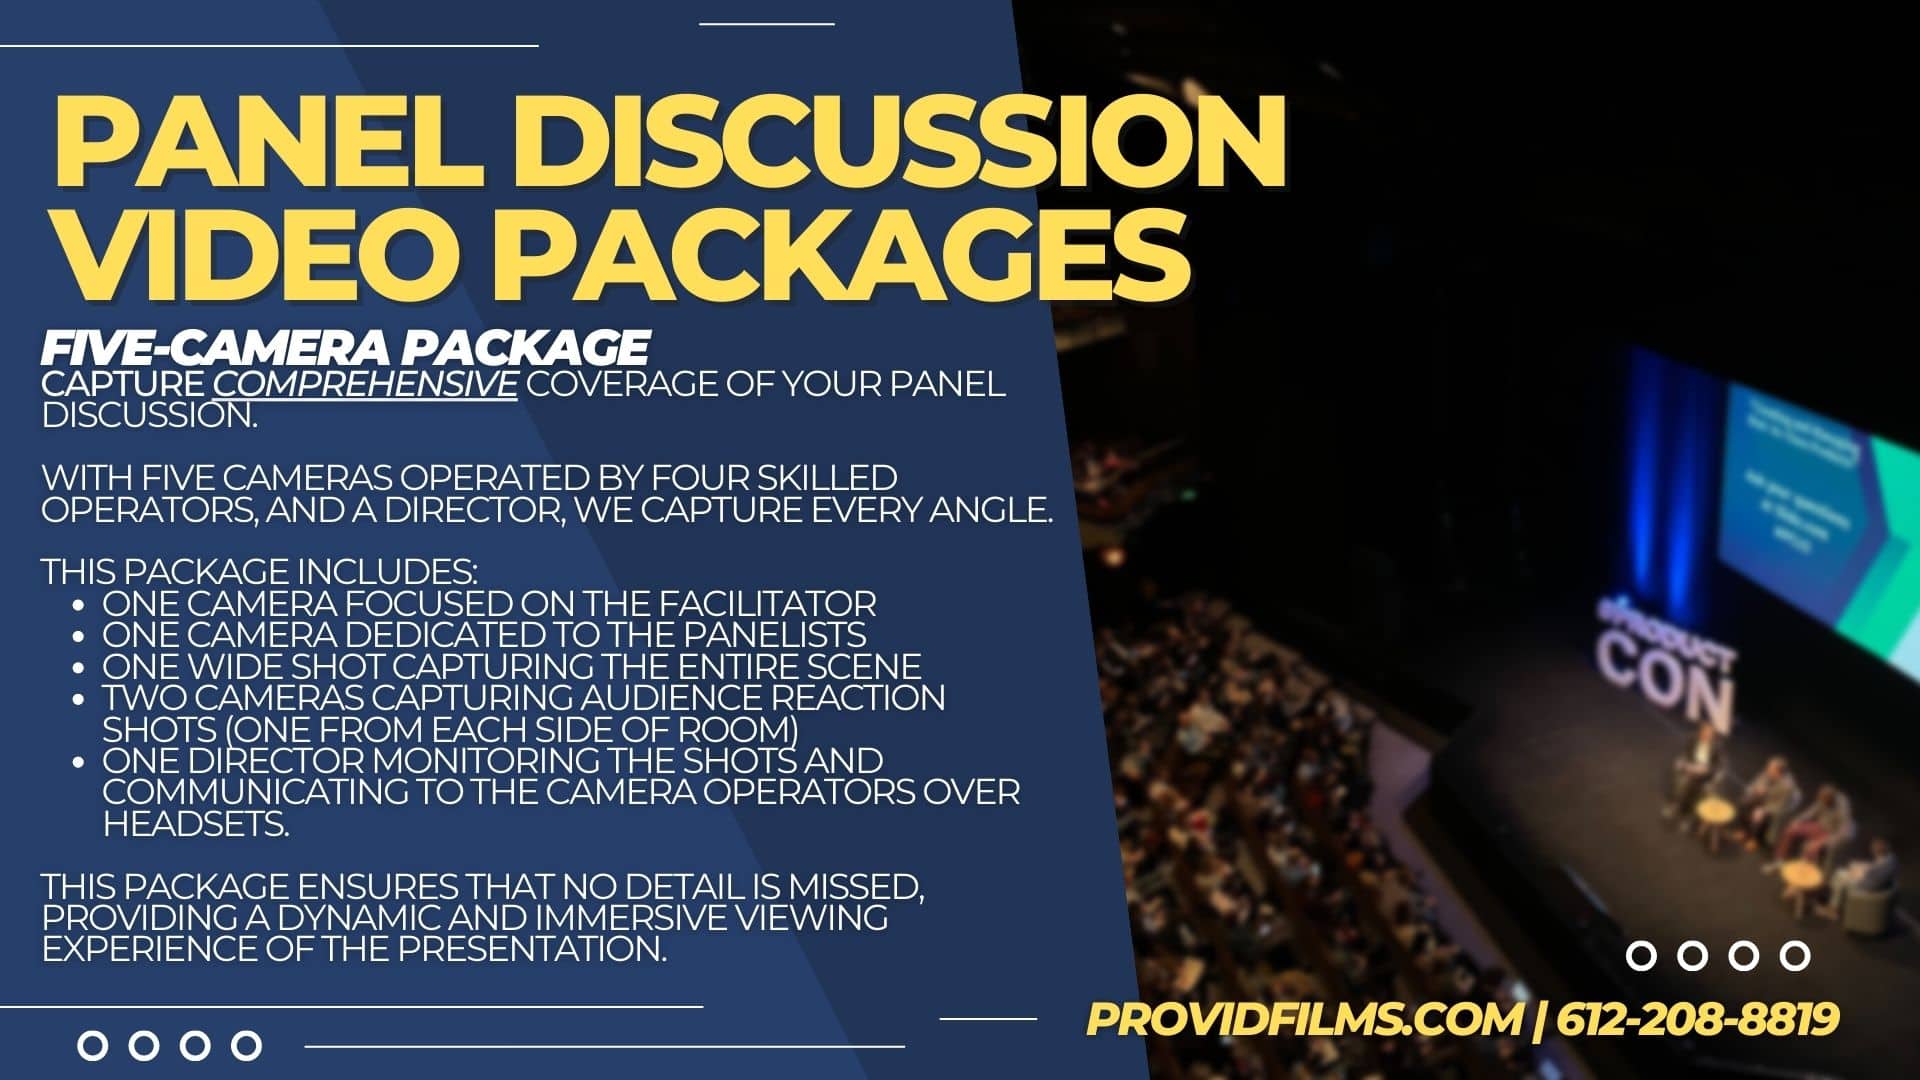 Panel Discussions Video Services Graphic - 5 camera package